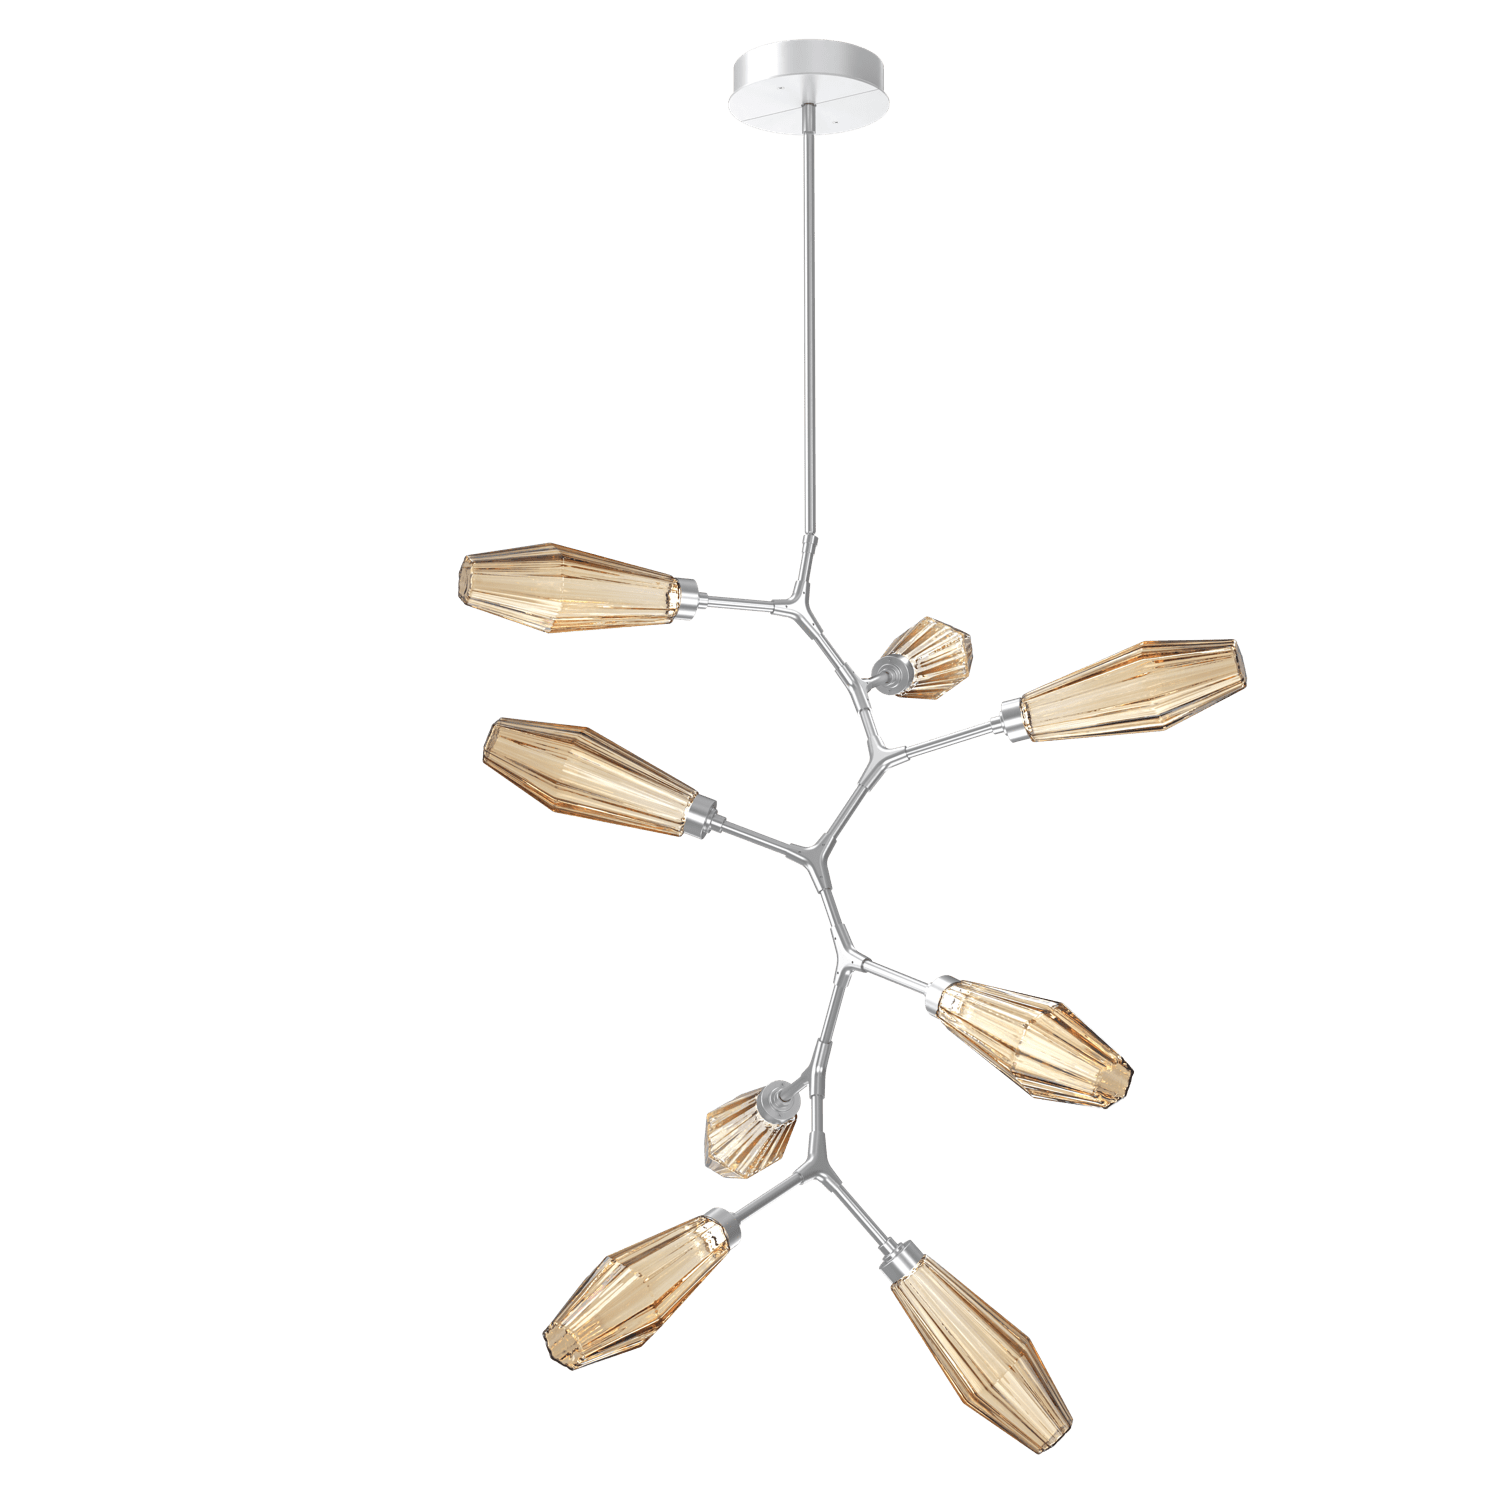 CHB0049-VB-CS-RB-Hammerton-Studio-Aalto-8-light-modern-vine-chandelier-with-classic-silver-finish-and-optic-ribbed-bronze-glass-shades-and-LED-lamping